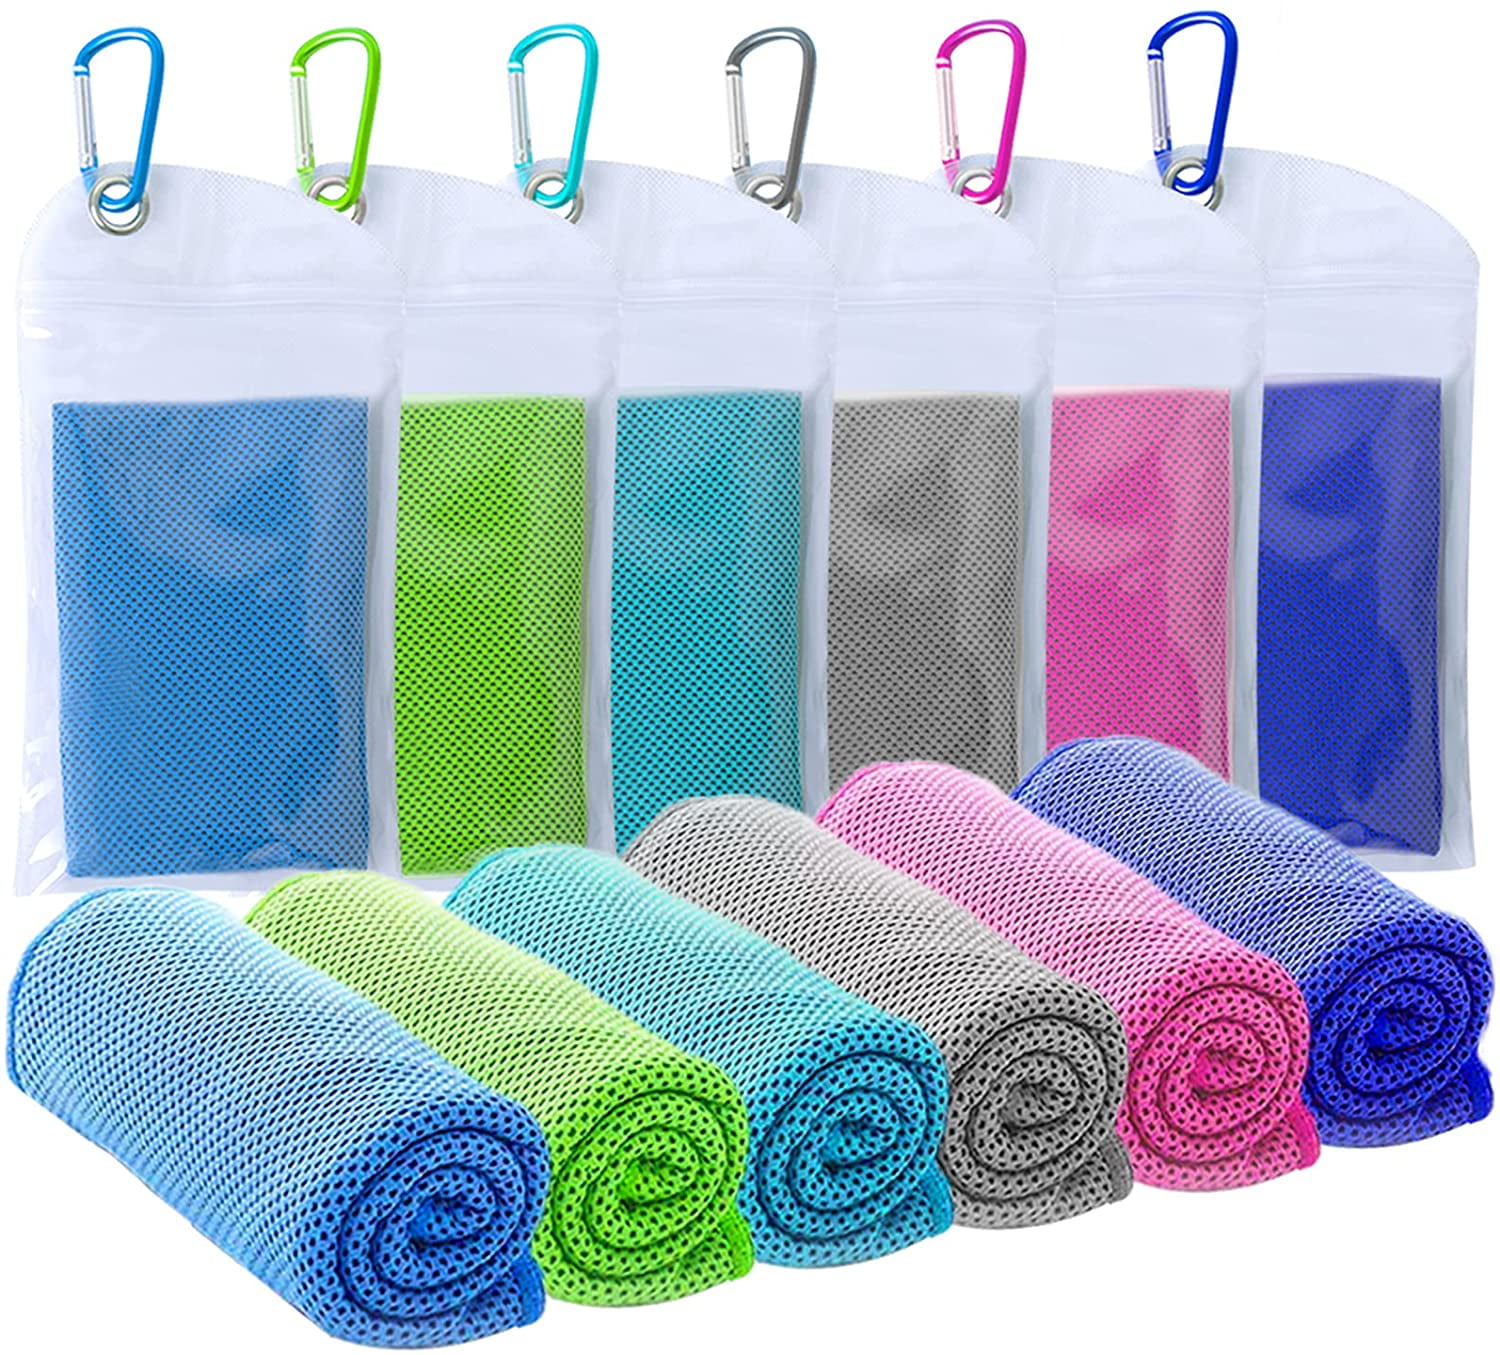 Outdoor Sports Towel for Instant Cooling Relief Your Choice Cooling Towel Workout Gym Bowling Camping Travel Golf Hiking Fitness Yoga 